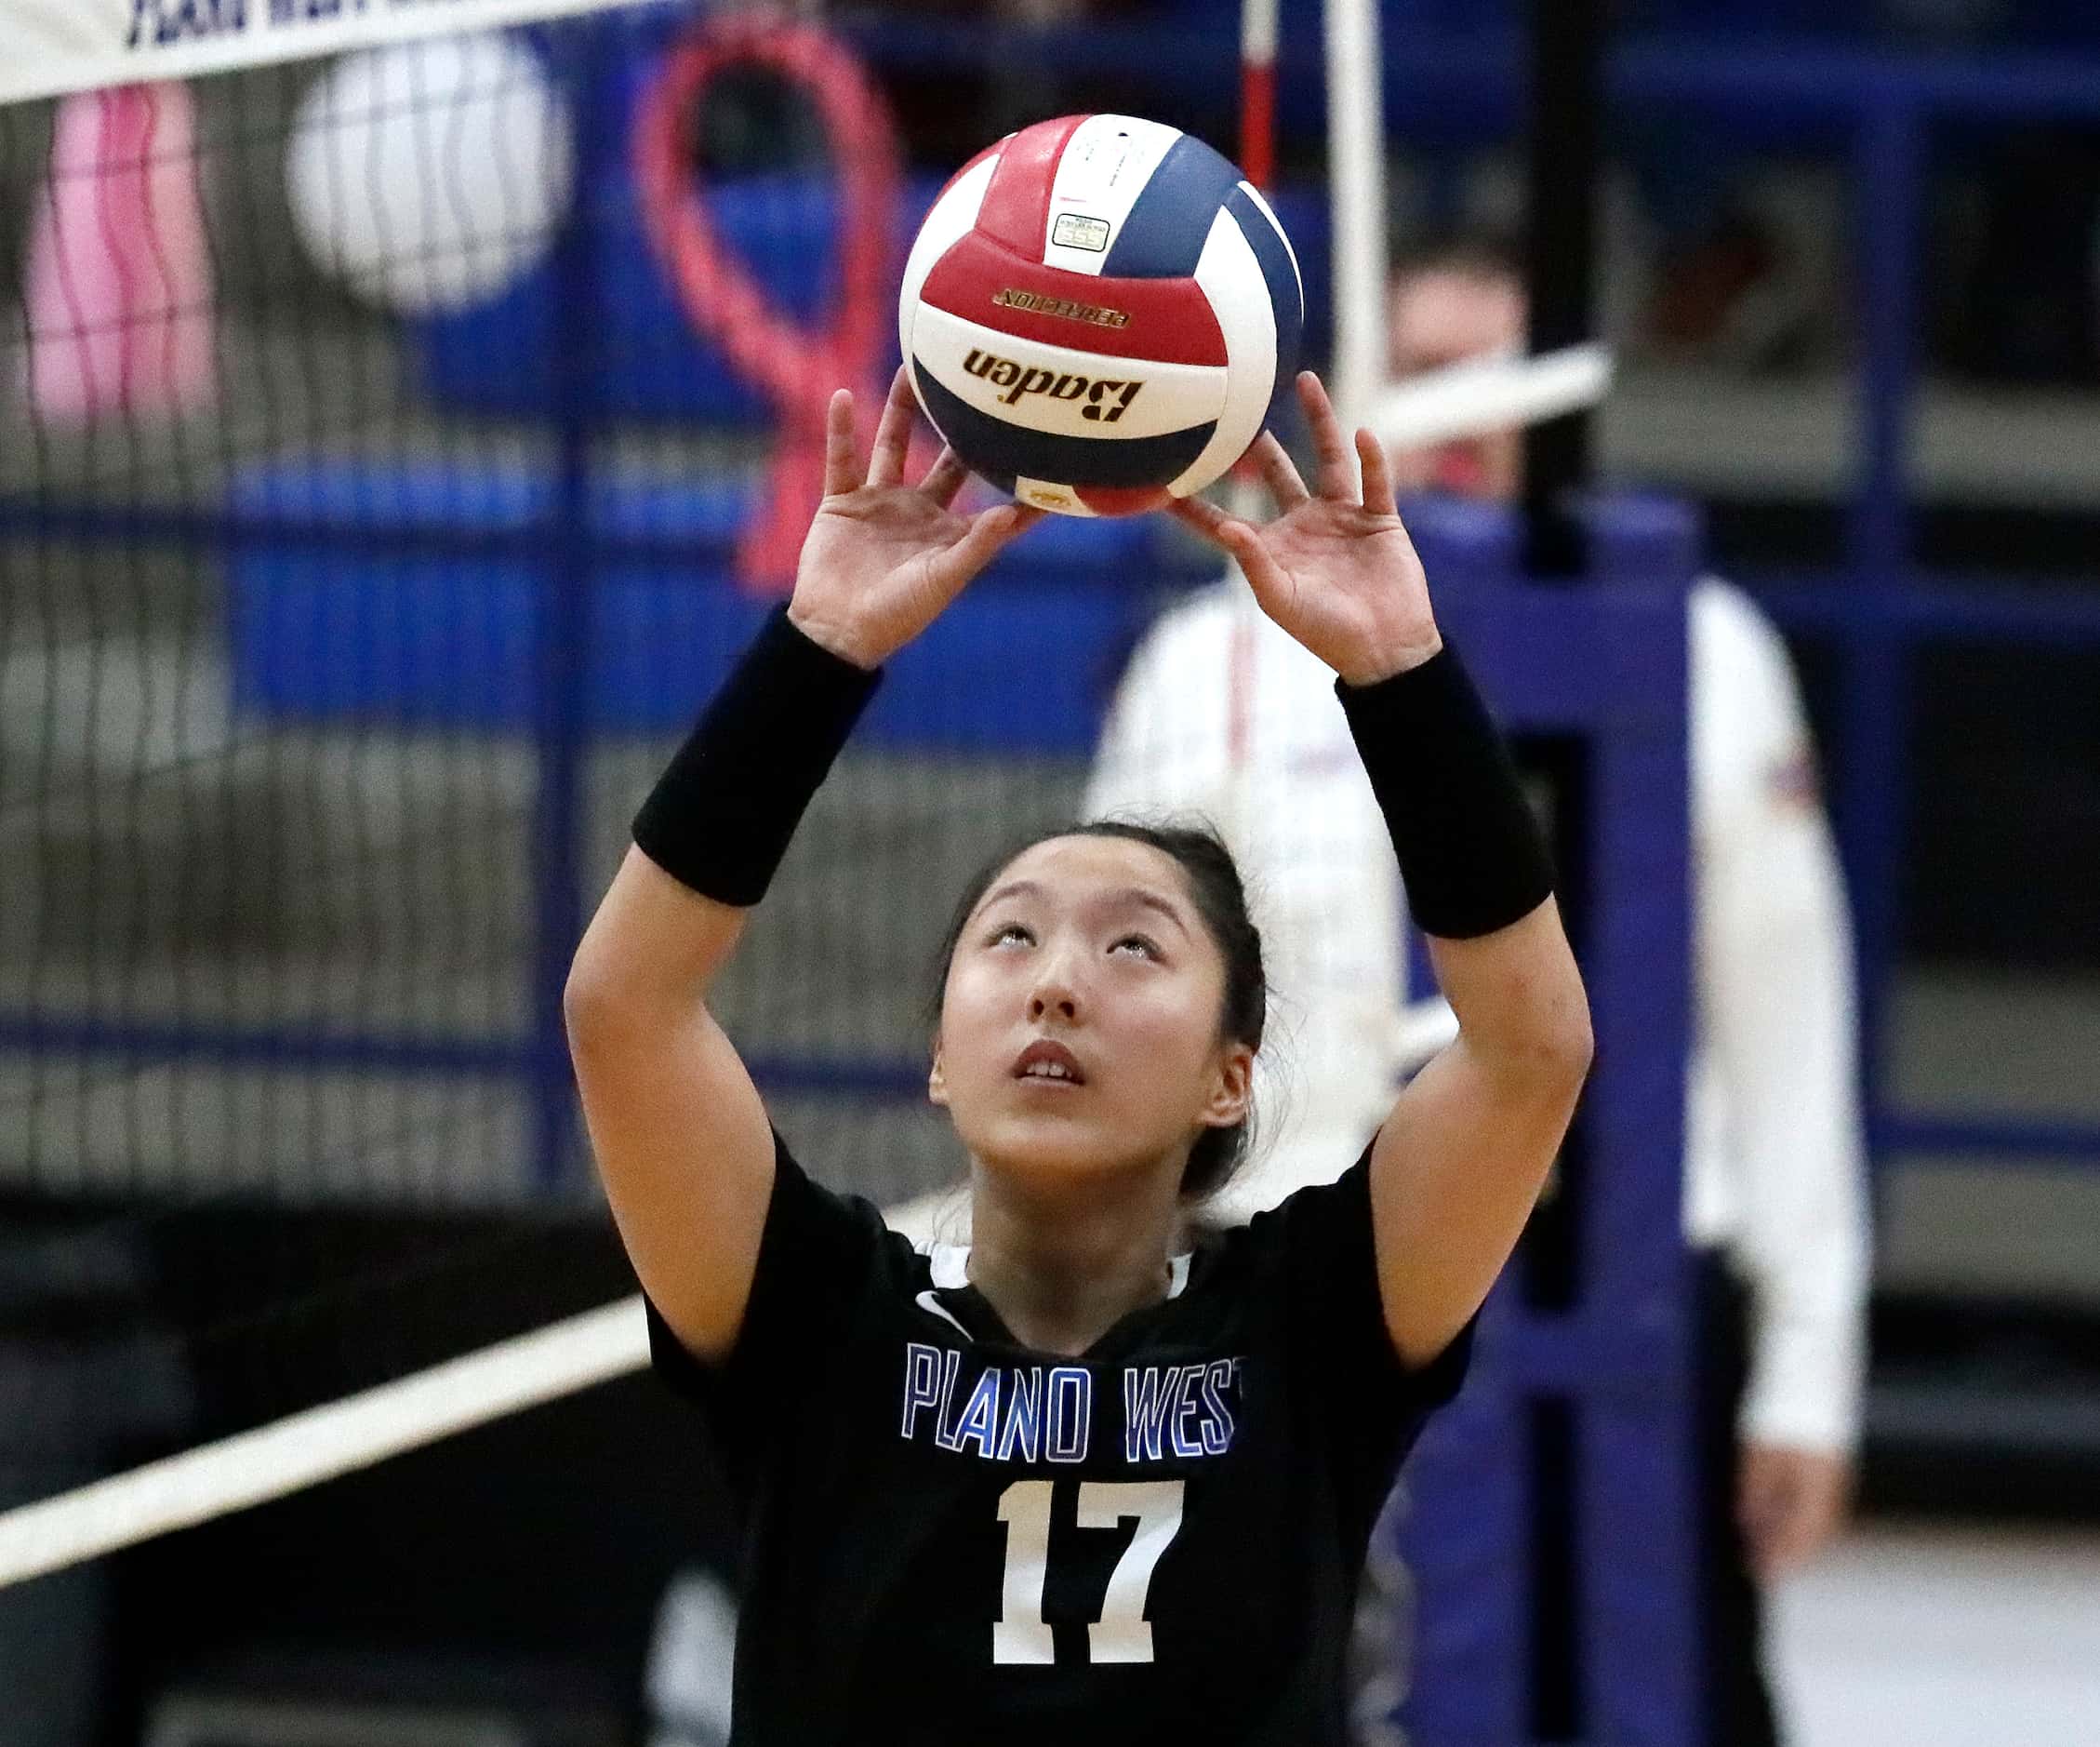 Plano West High School setter Sophia Wei (17) makes a set during game one as Plano West High...